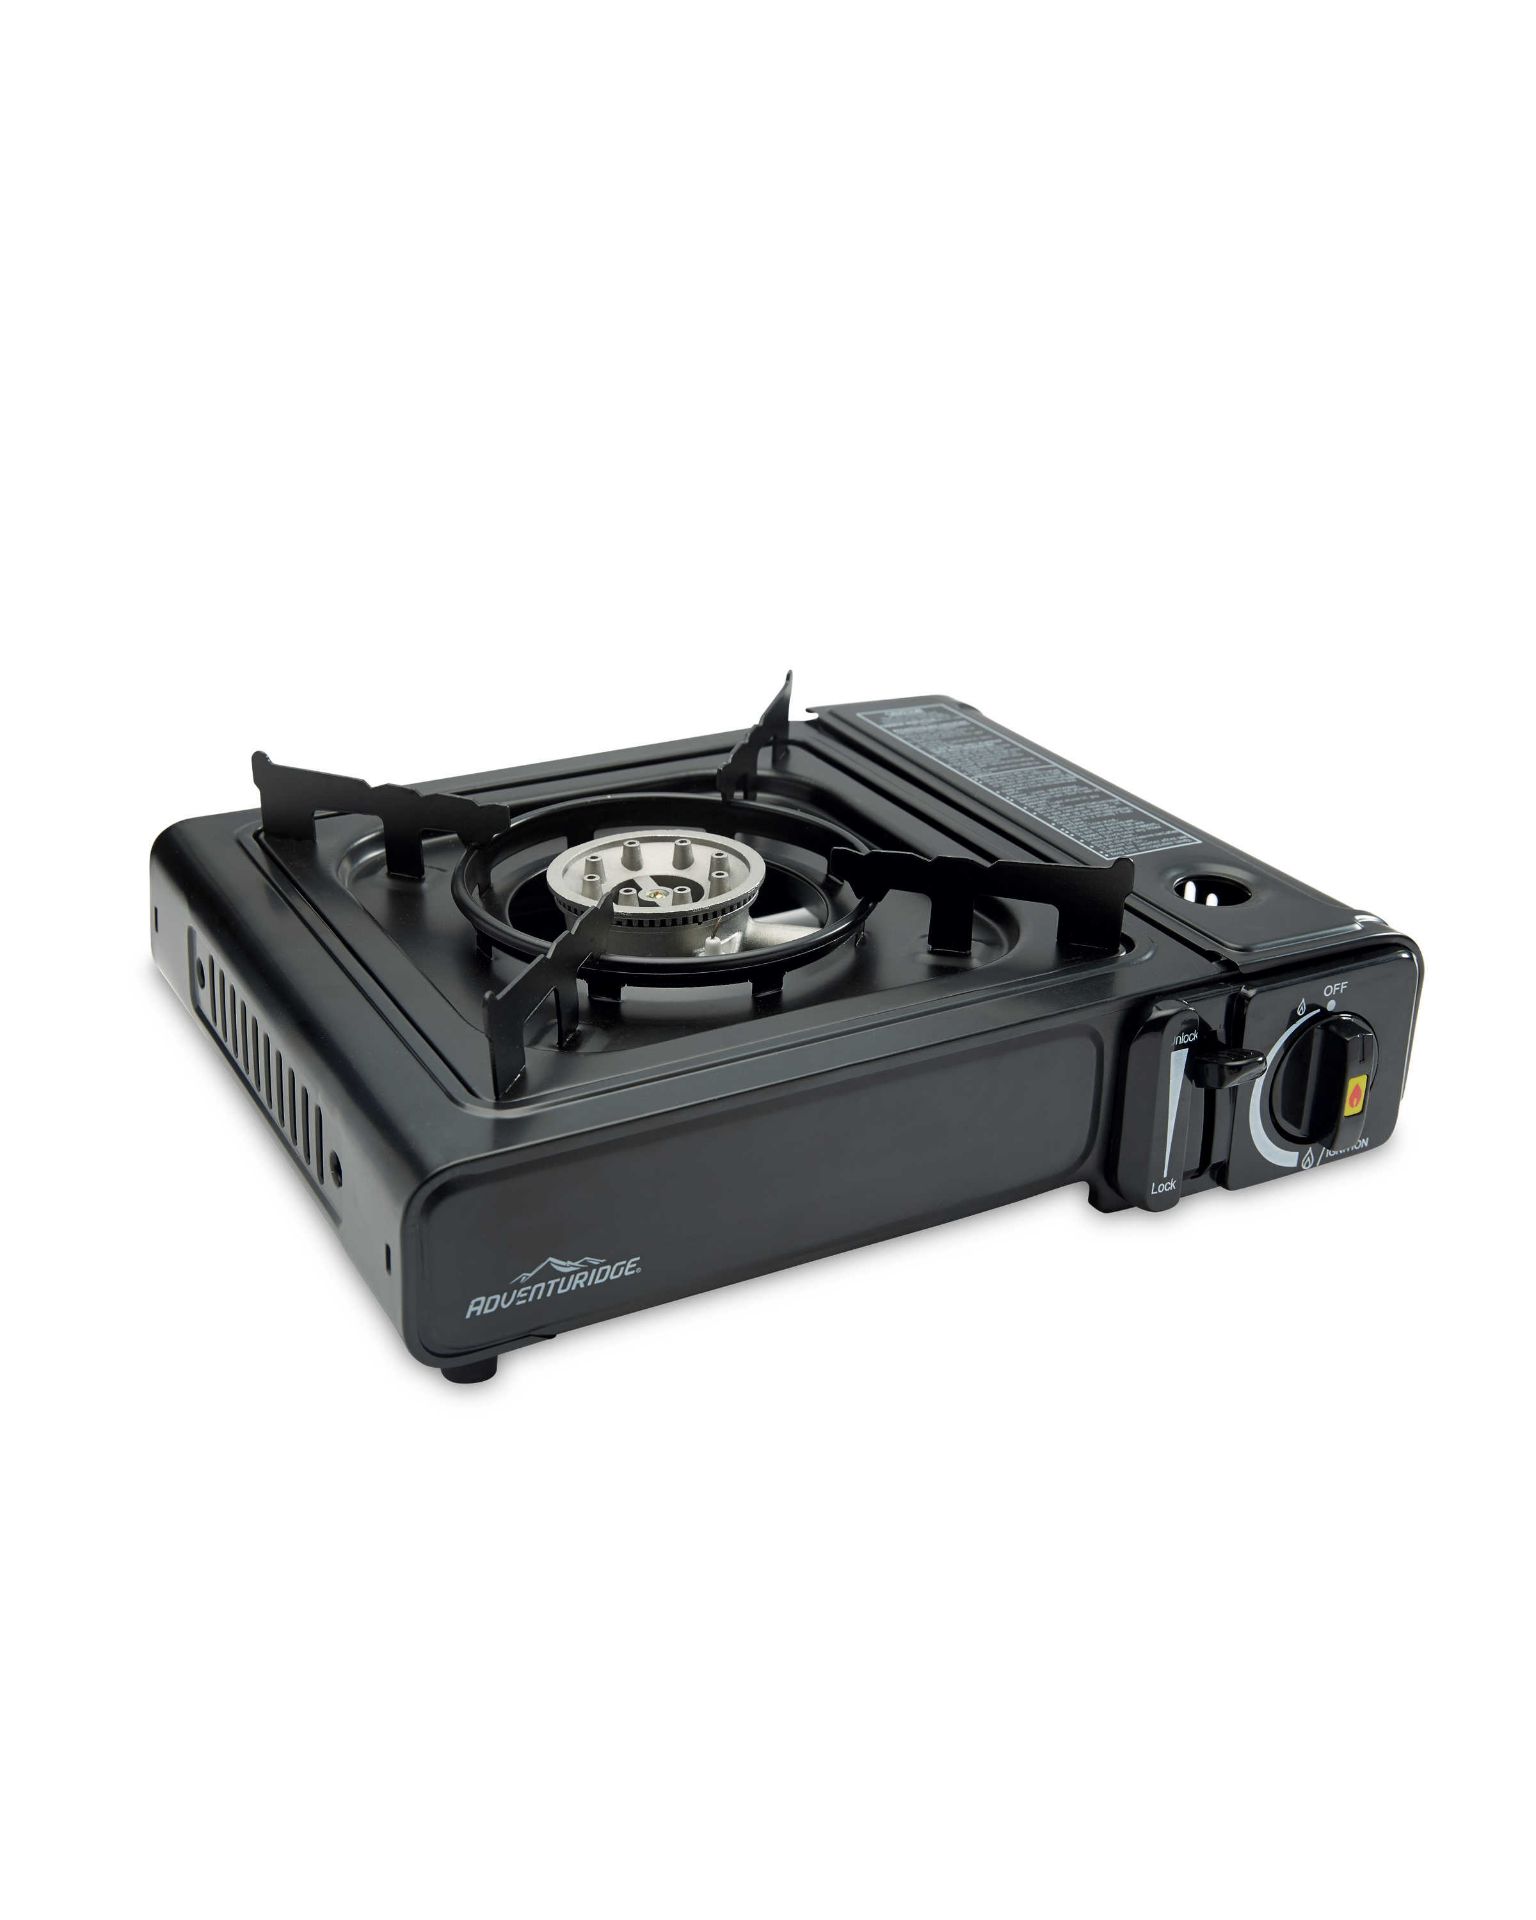 *TRADE QTY* Brand New Lightweight Portable Gas Cooker Includes Carry Case - Drip Pan - Variable - Image 2 of 2